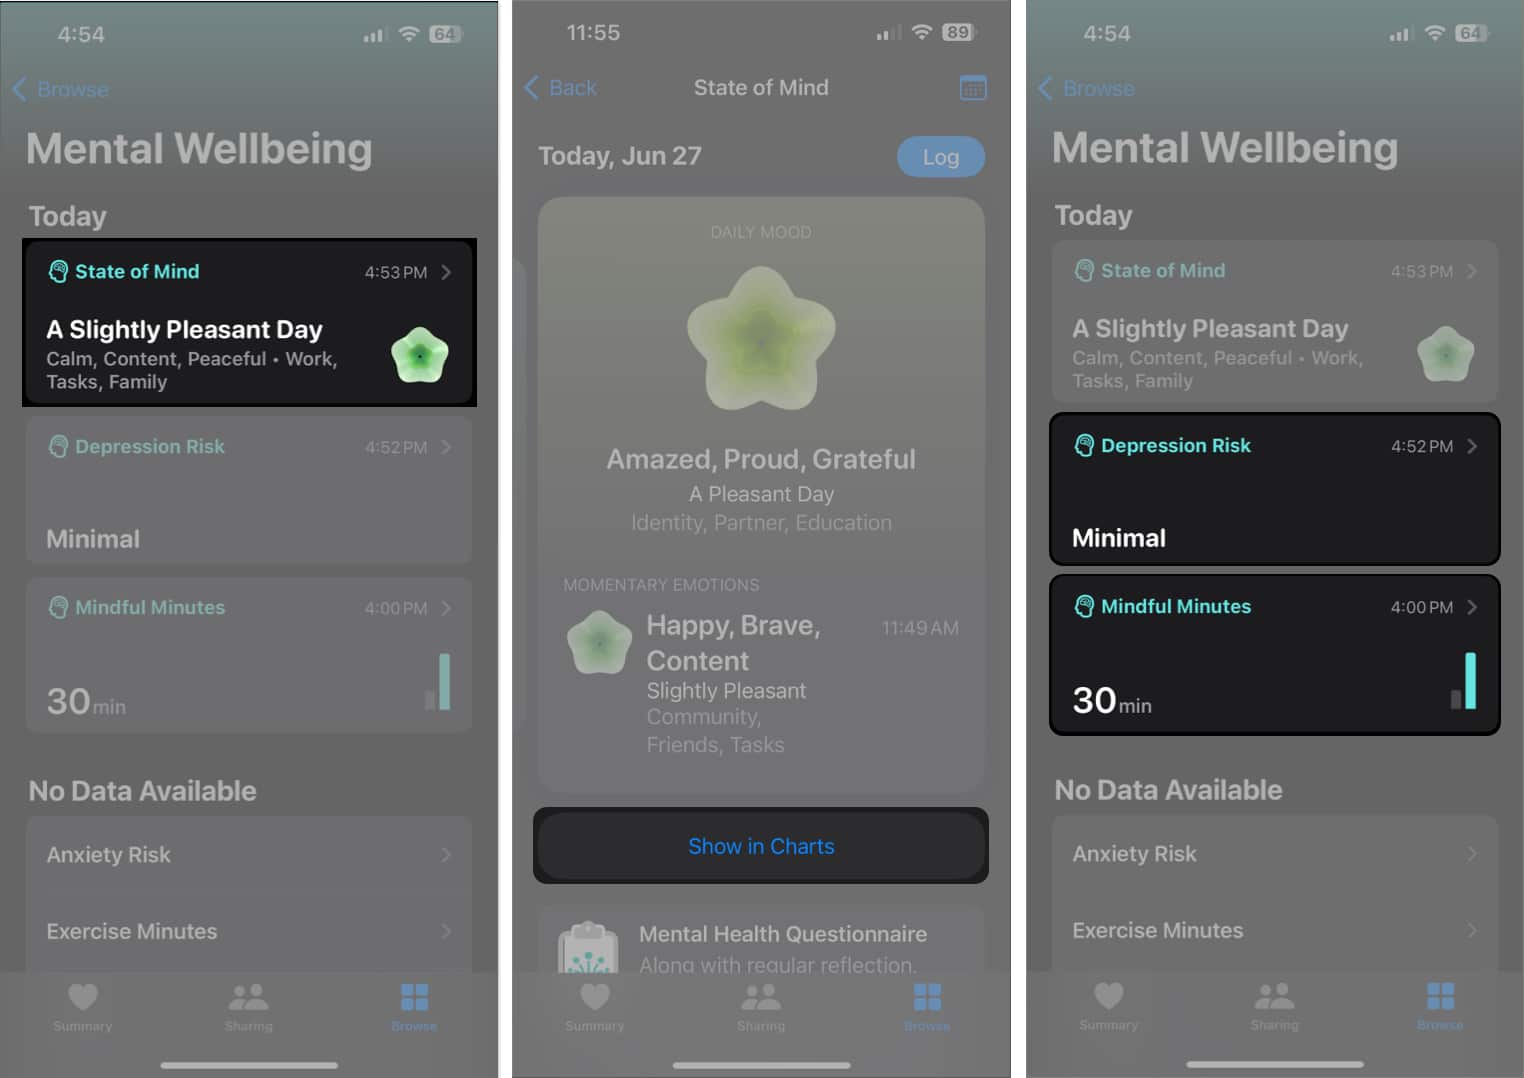 View Mental Wellbeing on iPhone